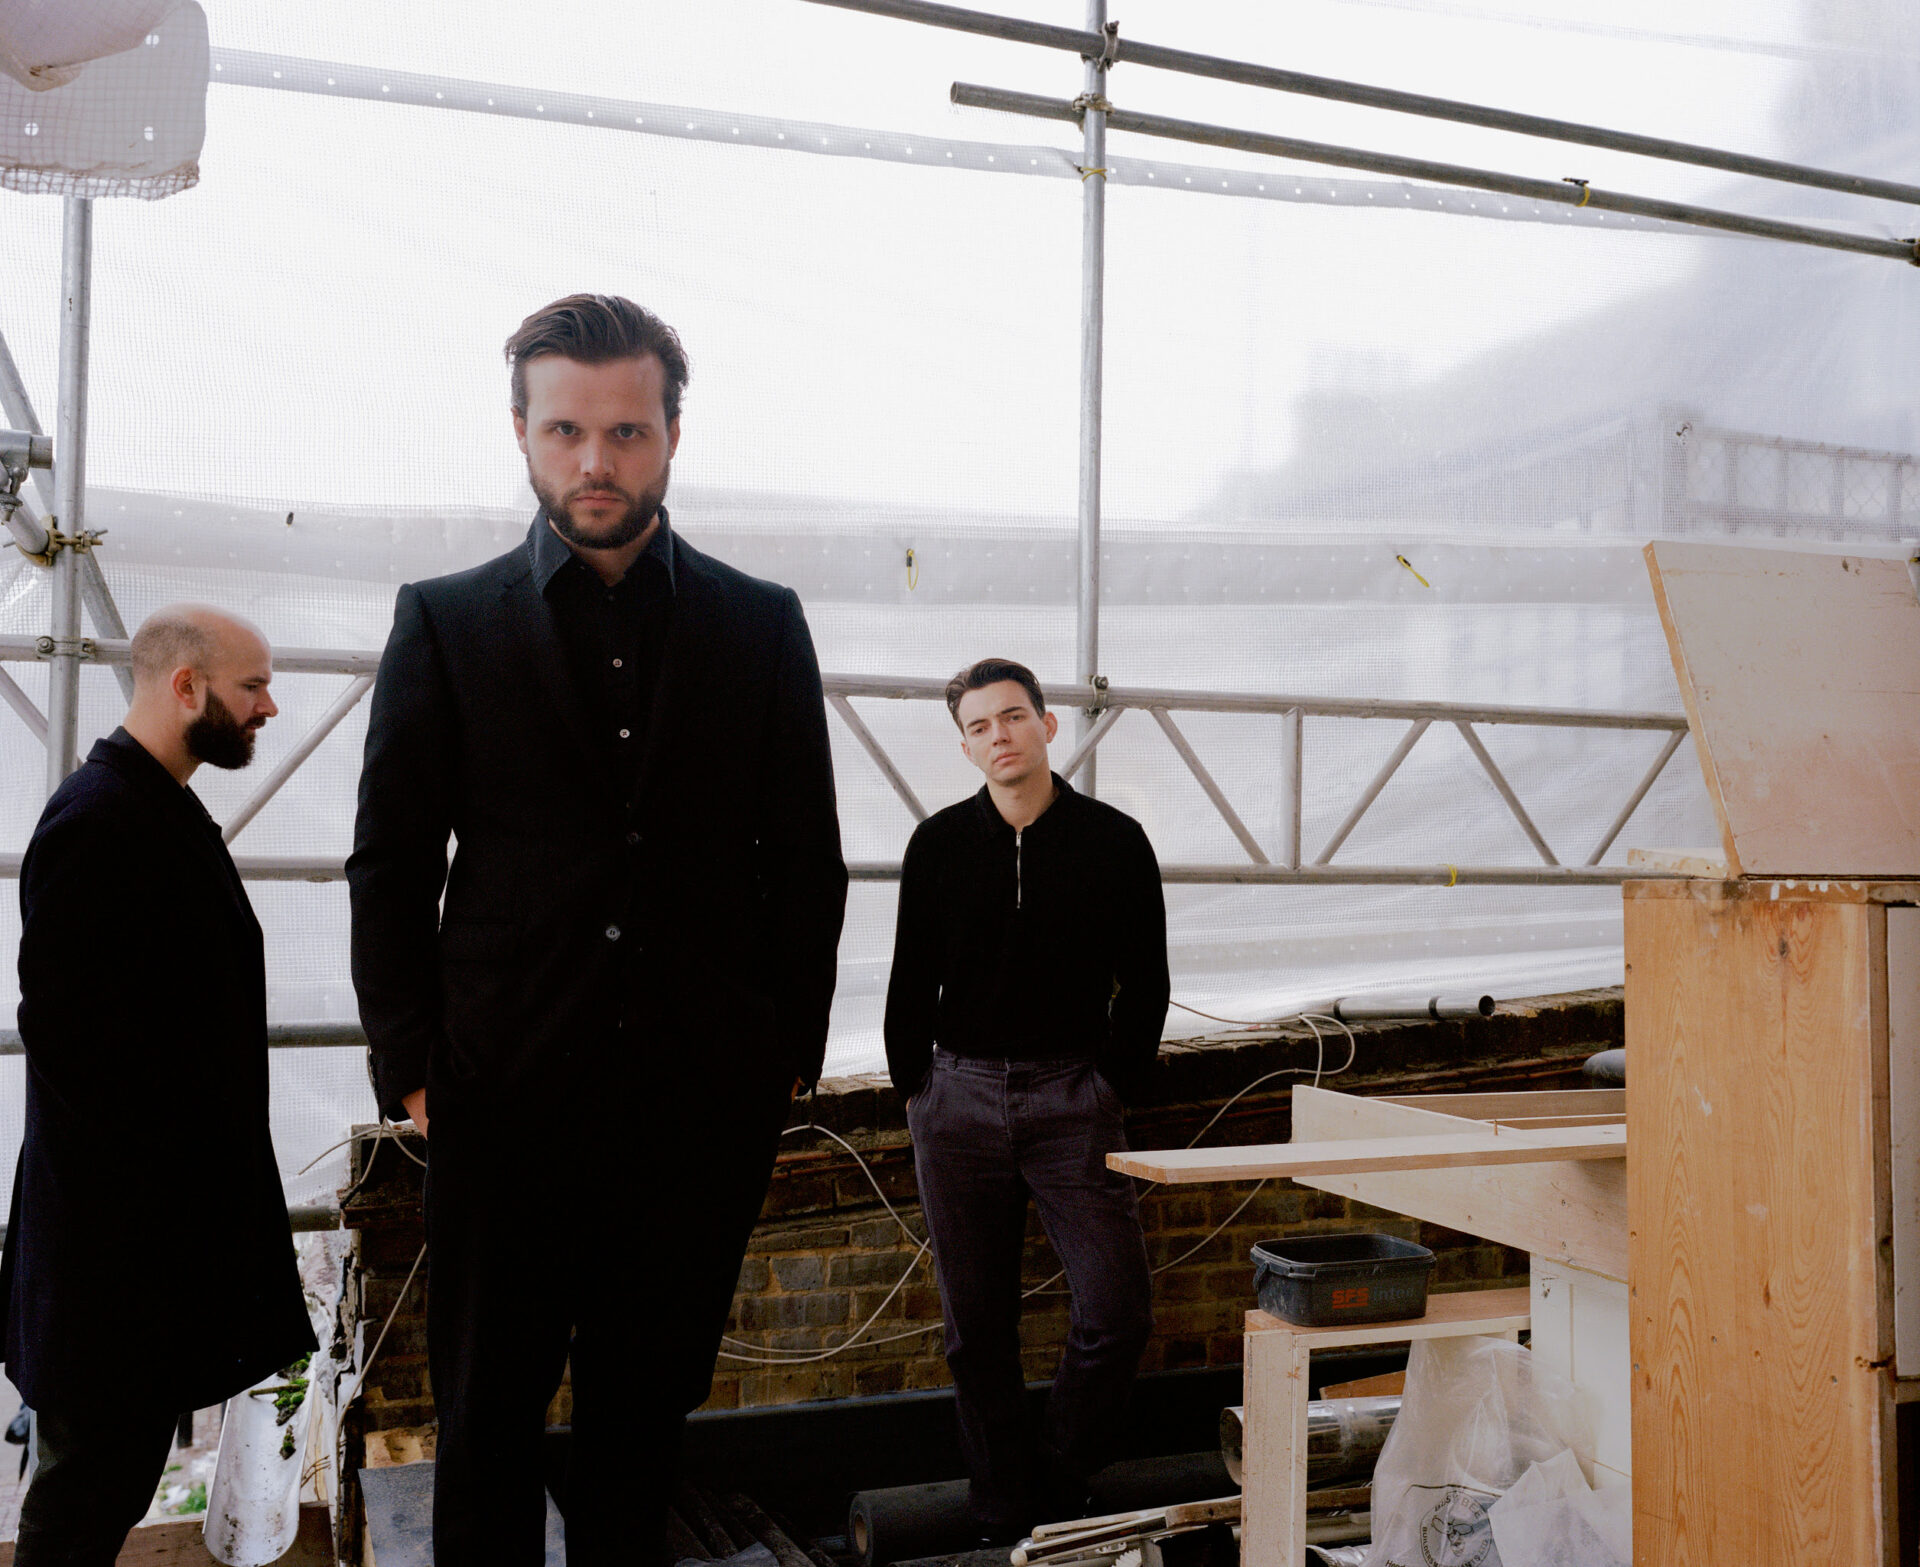 IN CONVERSATION: White Lies (Part Two)